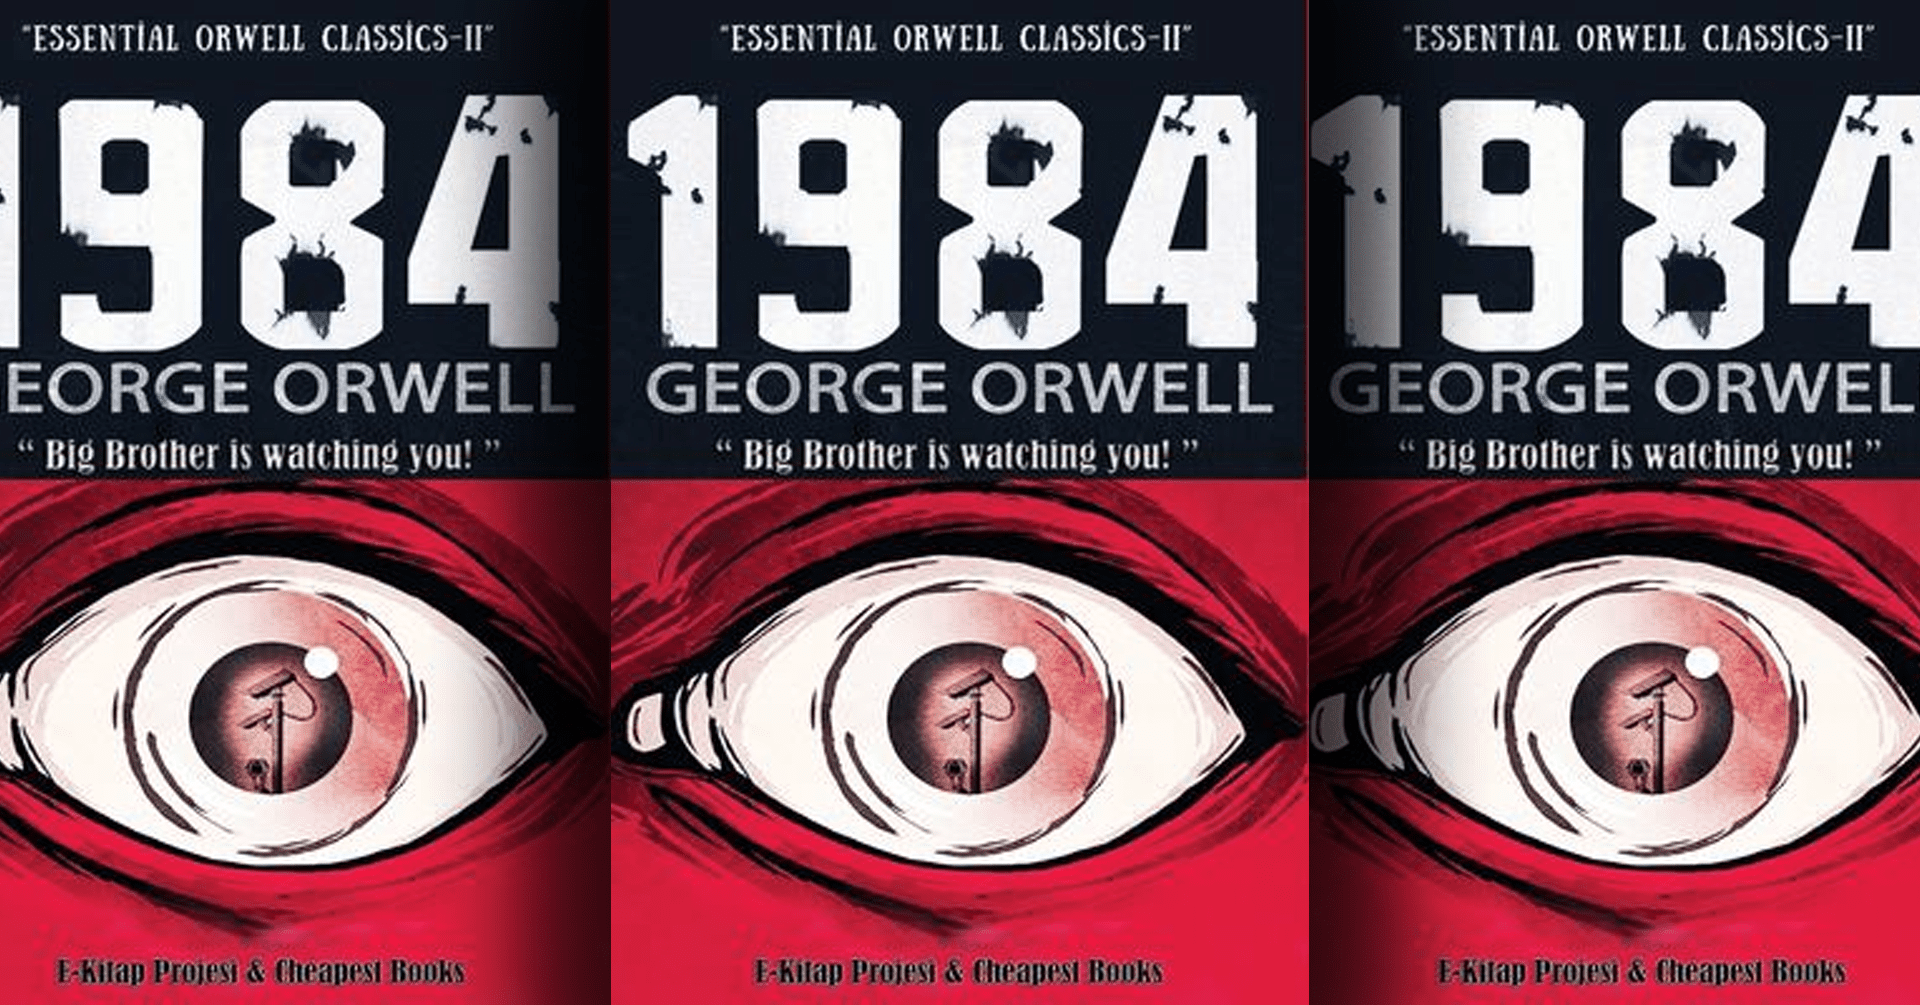 1984 by George Orwell (book cover)